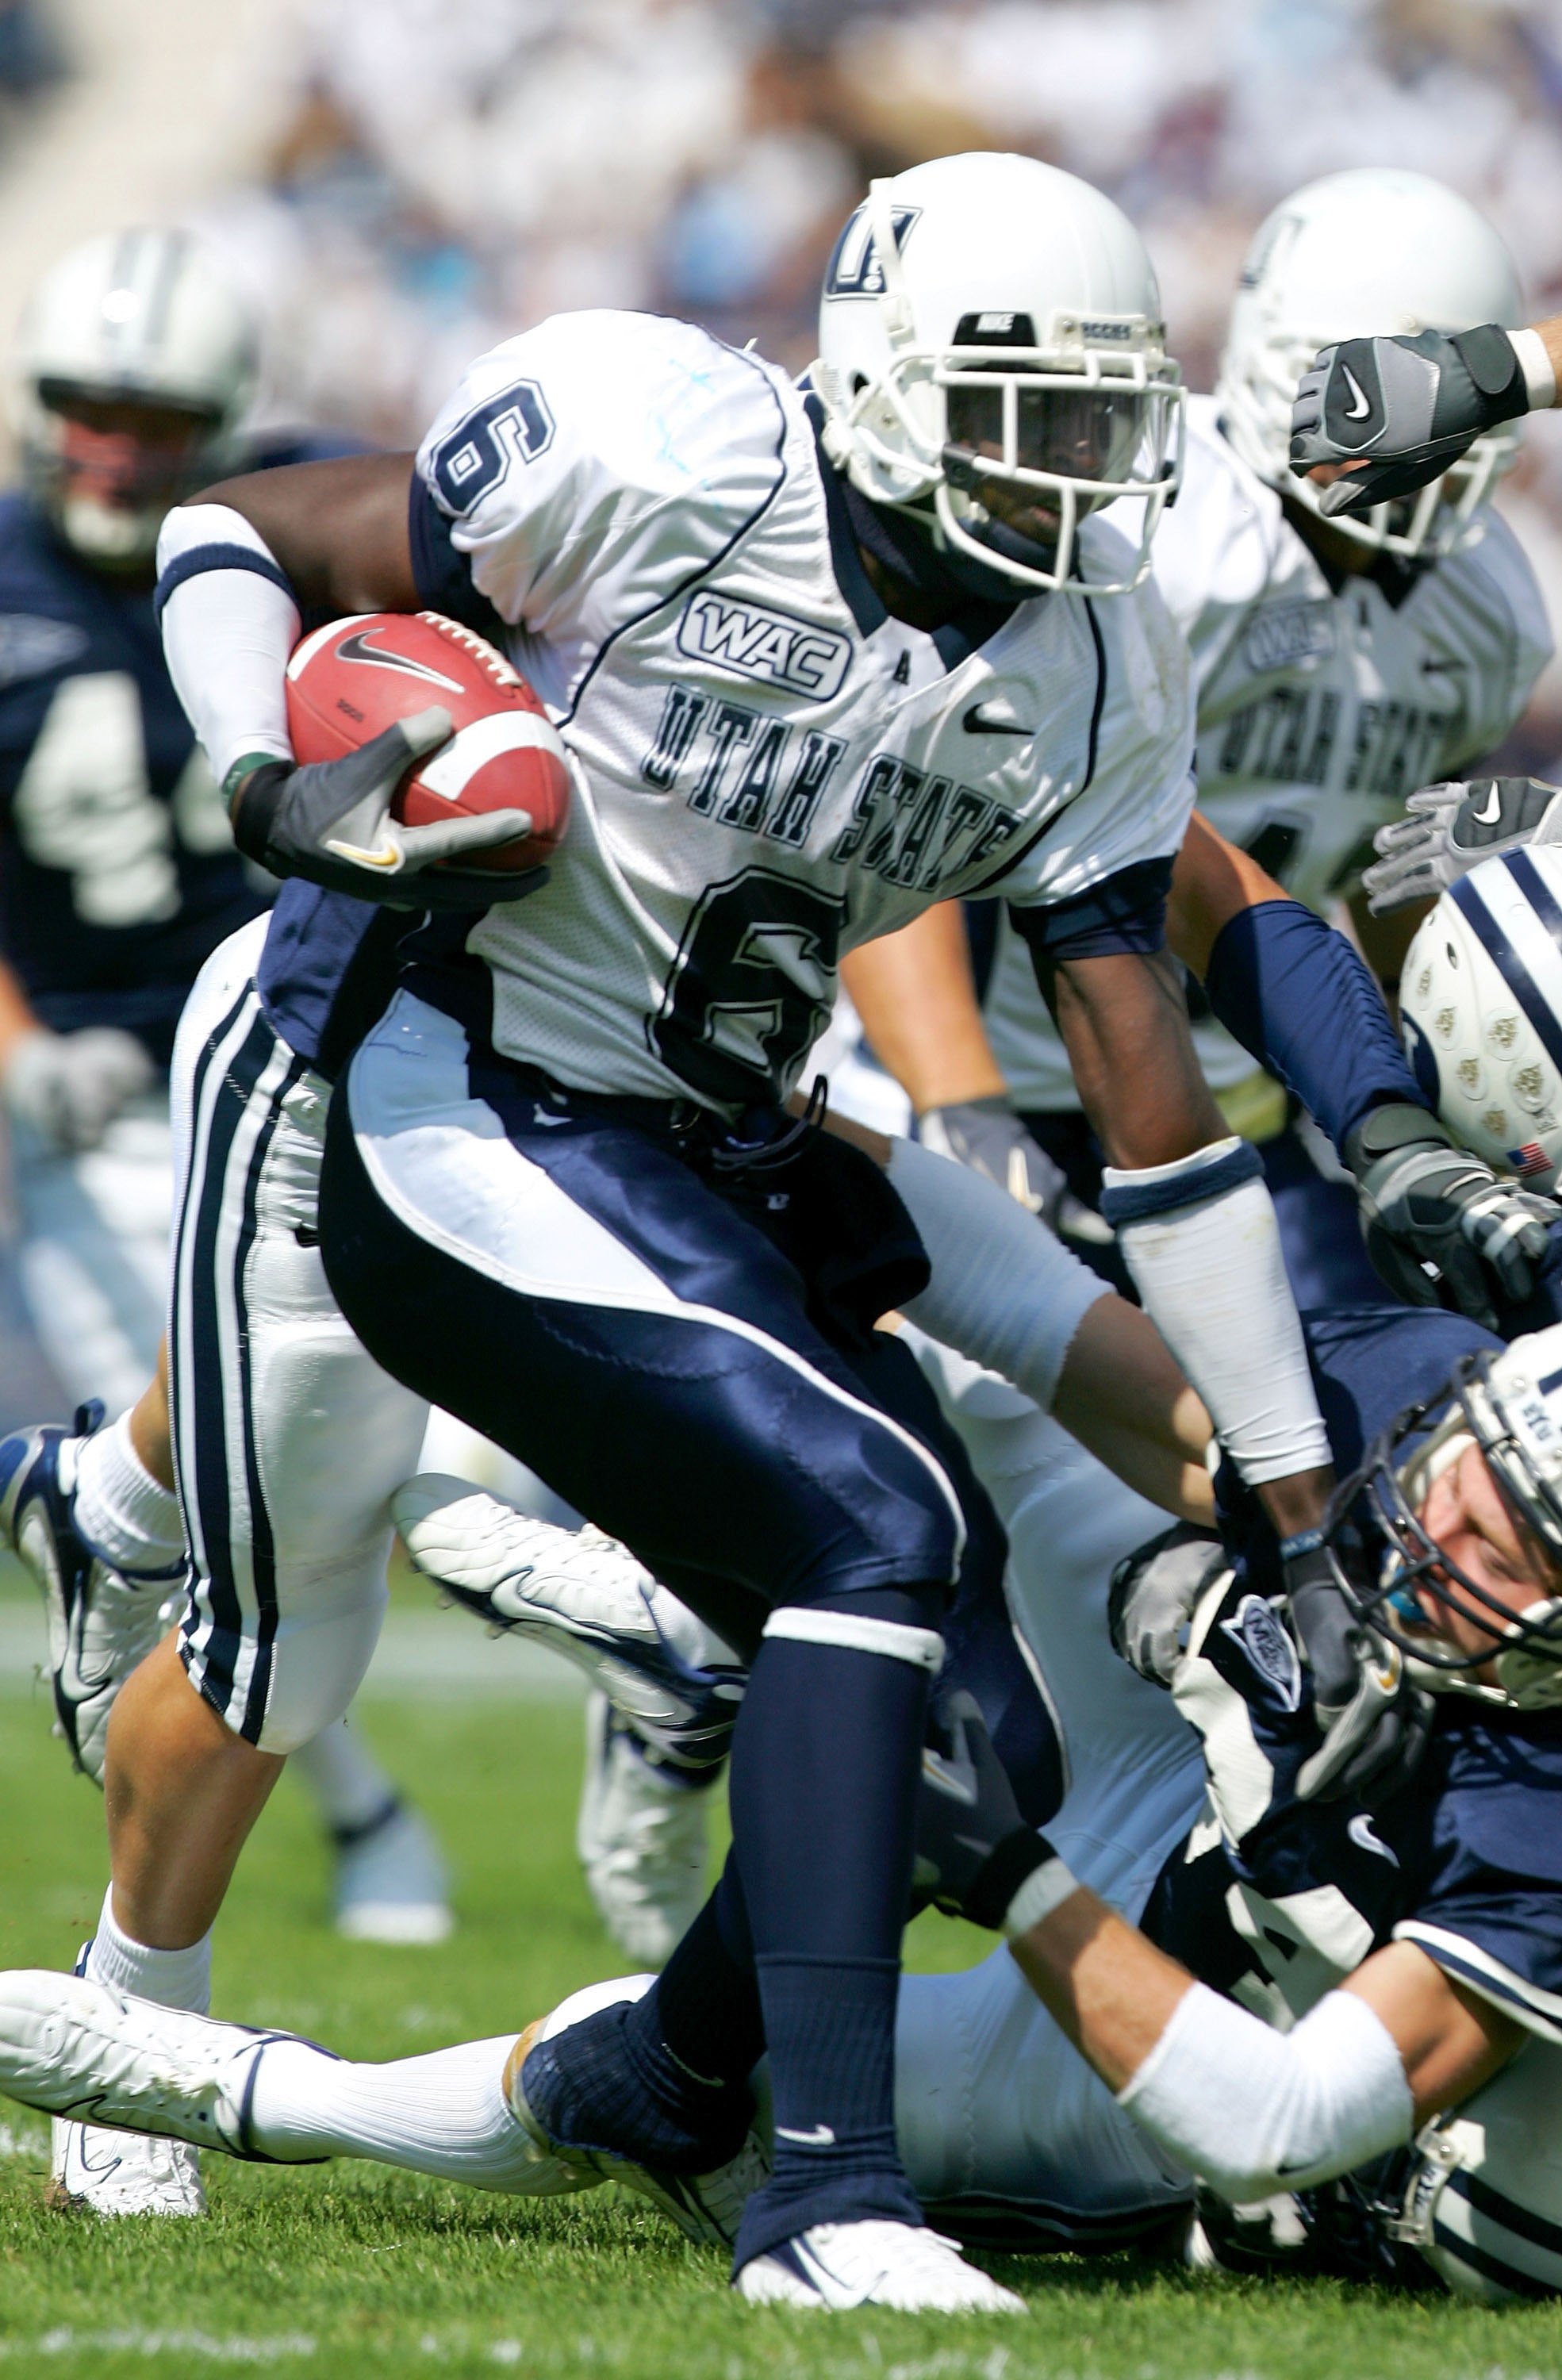 PROVO, UT - SEPTEMBER 23:  Kevin Robinson #6 of the Utah State Aggies runs with the ball against the Brigham Young Cougars on September 23, 2006 at La Vell Edwards Stadium in Provo, Utah.  (Photo By Kent Horner/Getty Images)